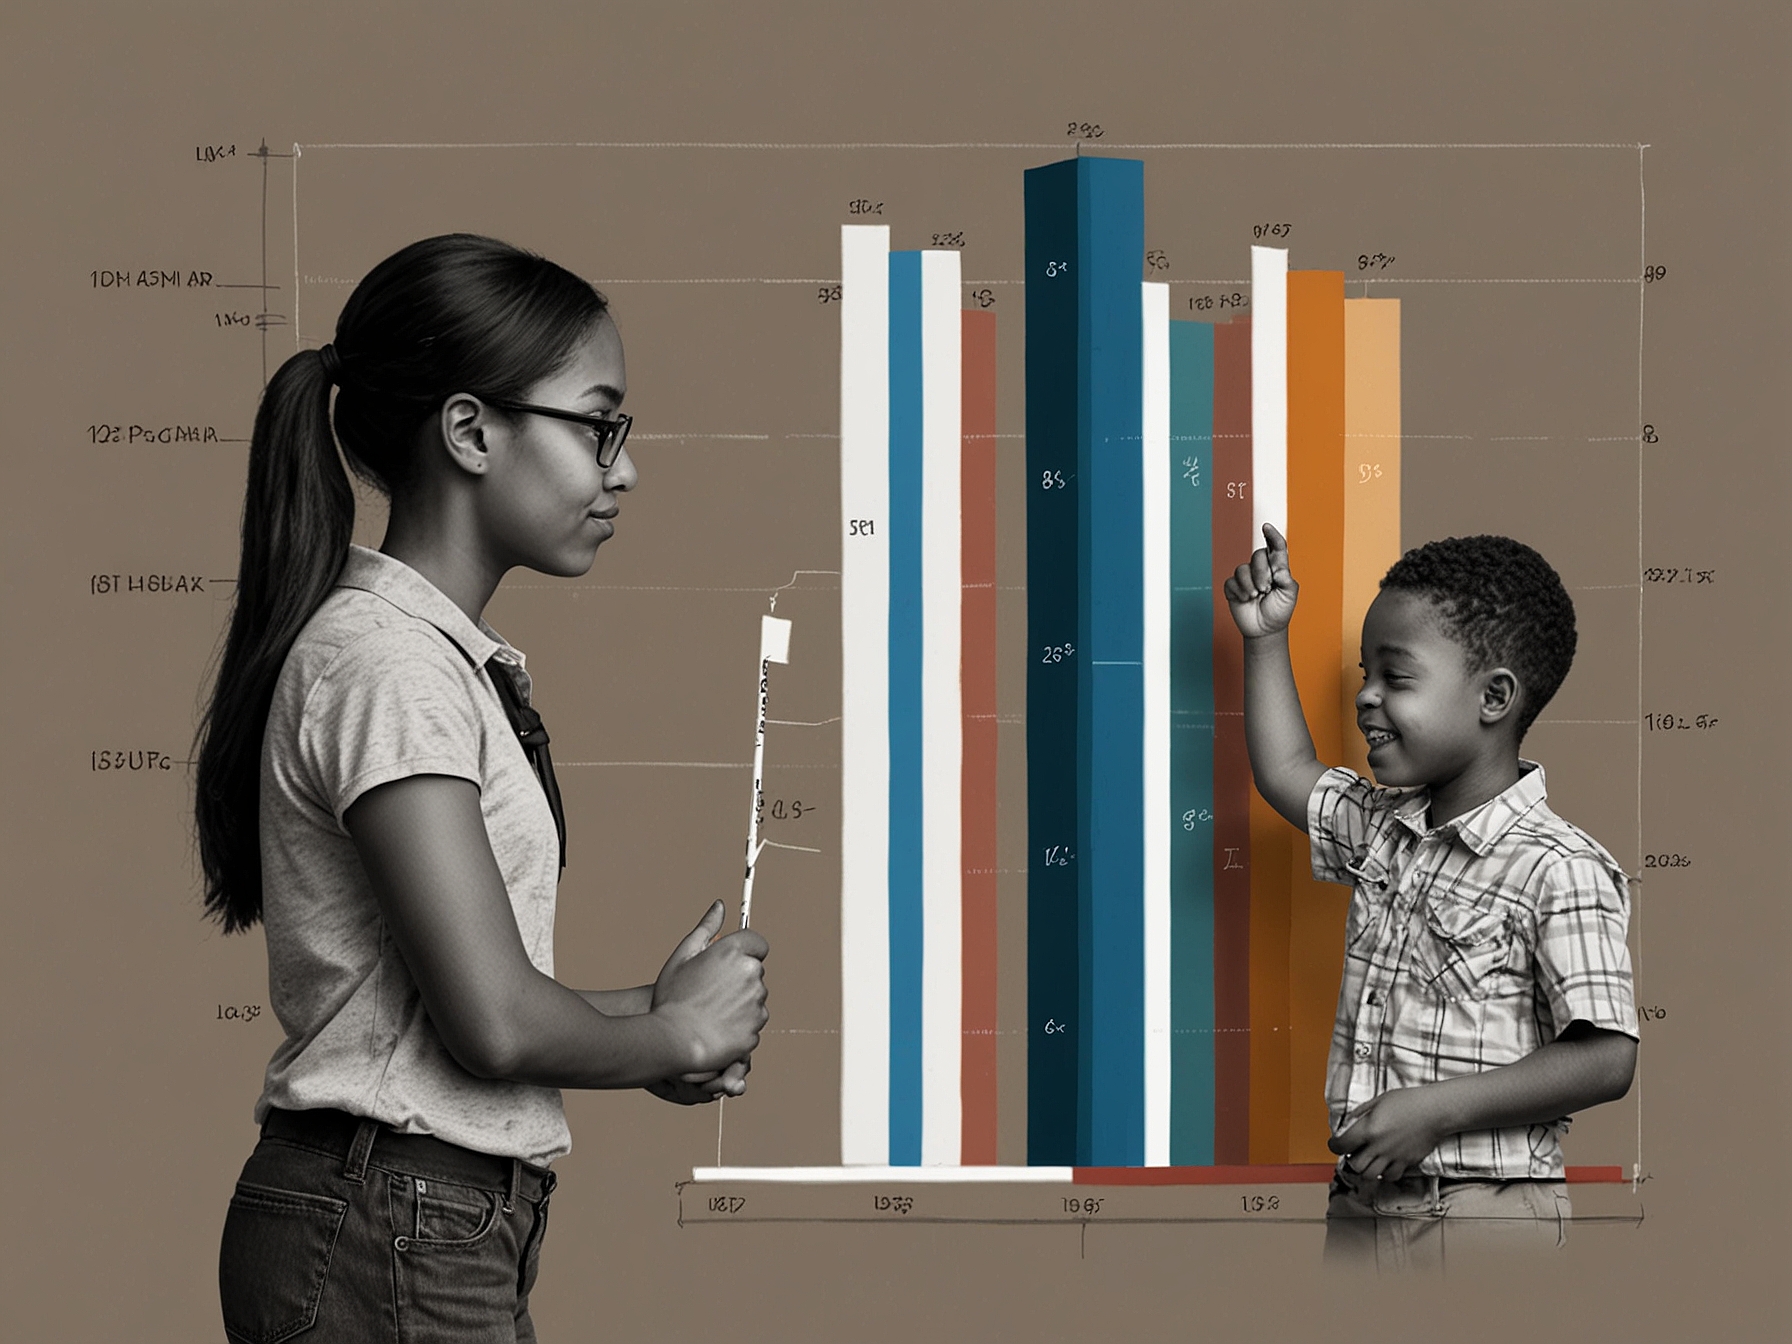 A comparative bar graph illustrating the performance gap in reading and math proficiency between white students and students of color in Minnesota.